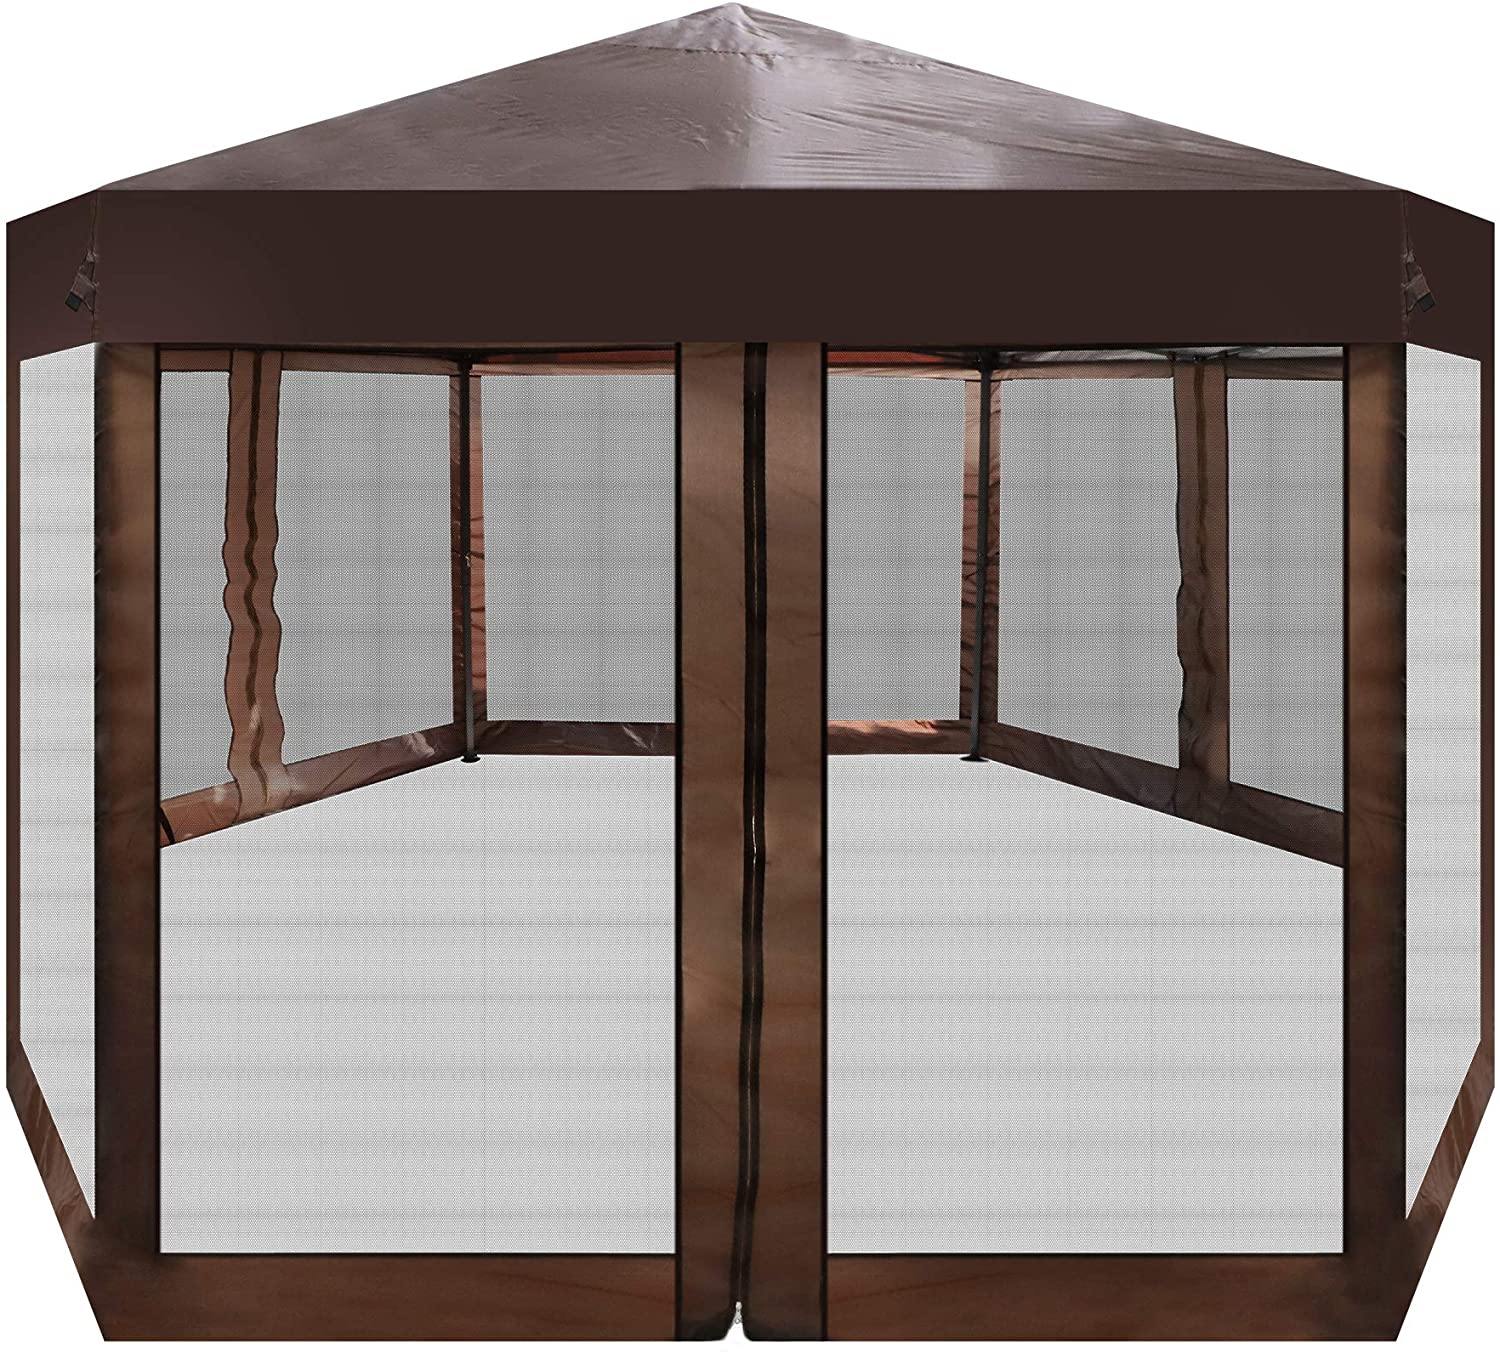 6.5' x 6.5' Outdoor Gazebo Patio Hexagonal Canopy Tent Sun Shade with Mosquito Netting and Carry Bag for Backyard Party - Bosonshop